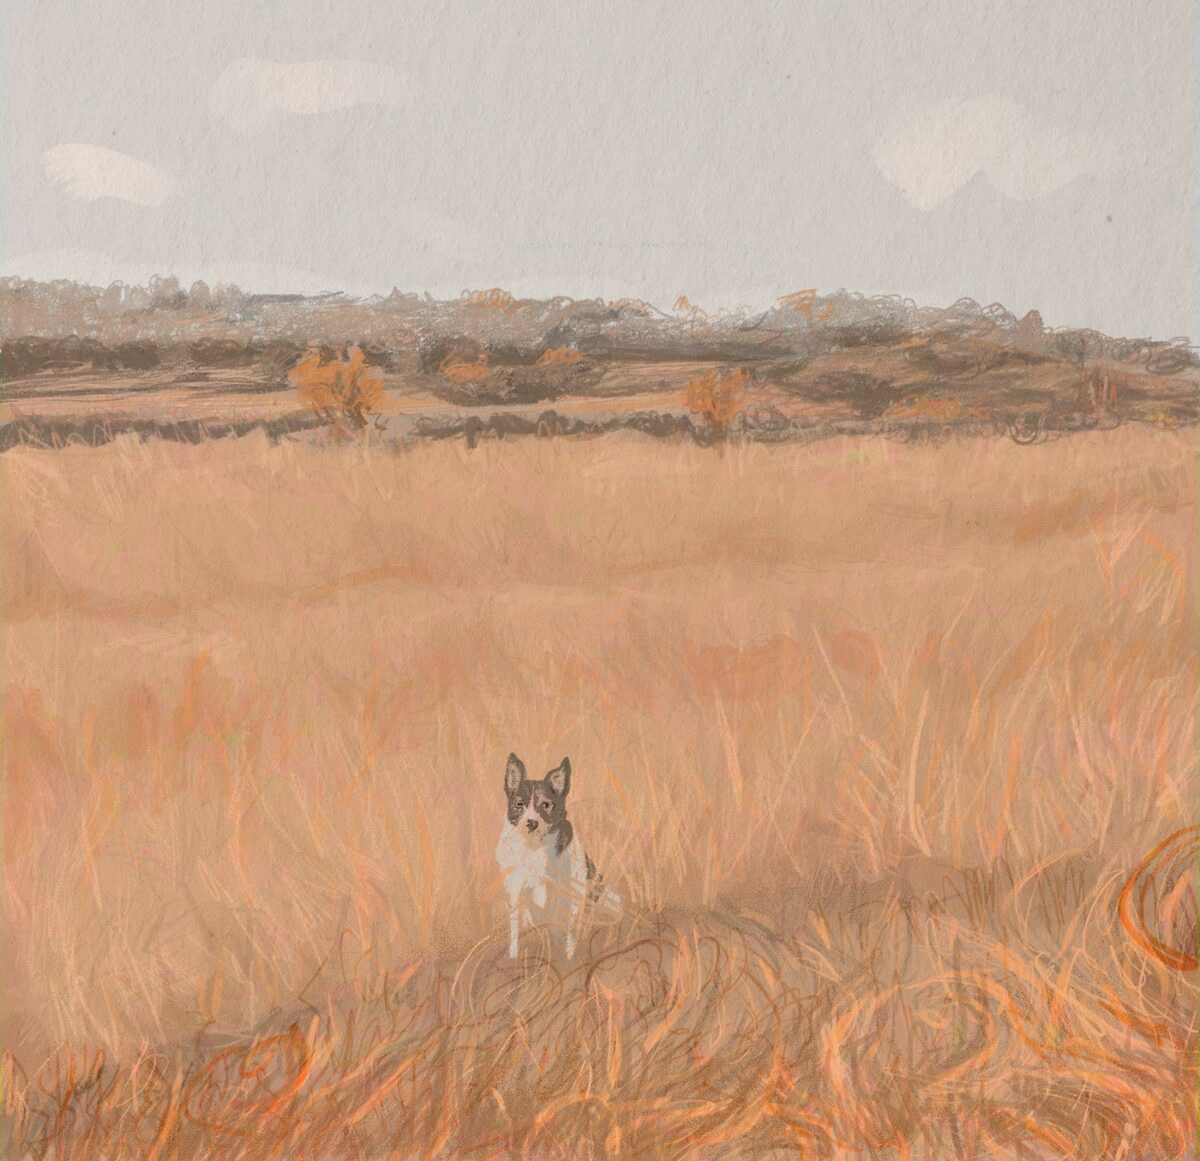 A Walk Through The Fields A Marvelous Digital Painting Series By Veronika Stehr 5